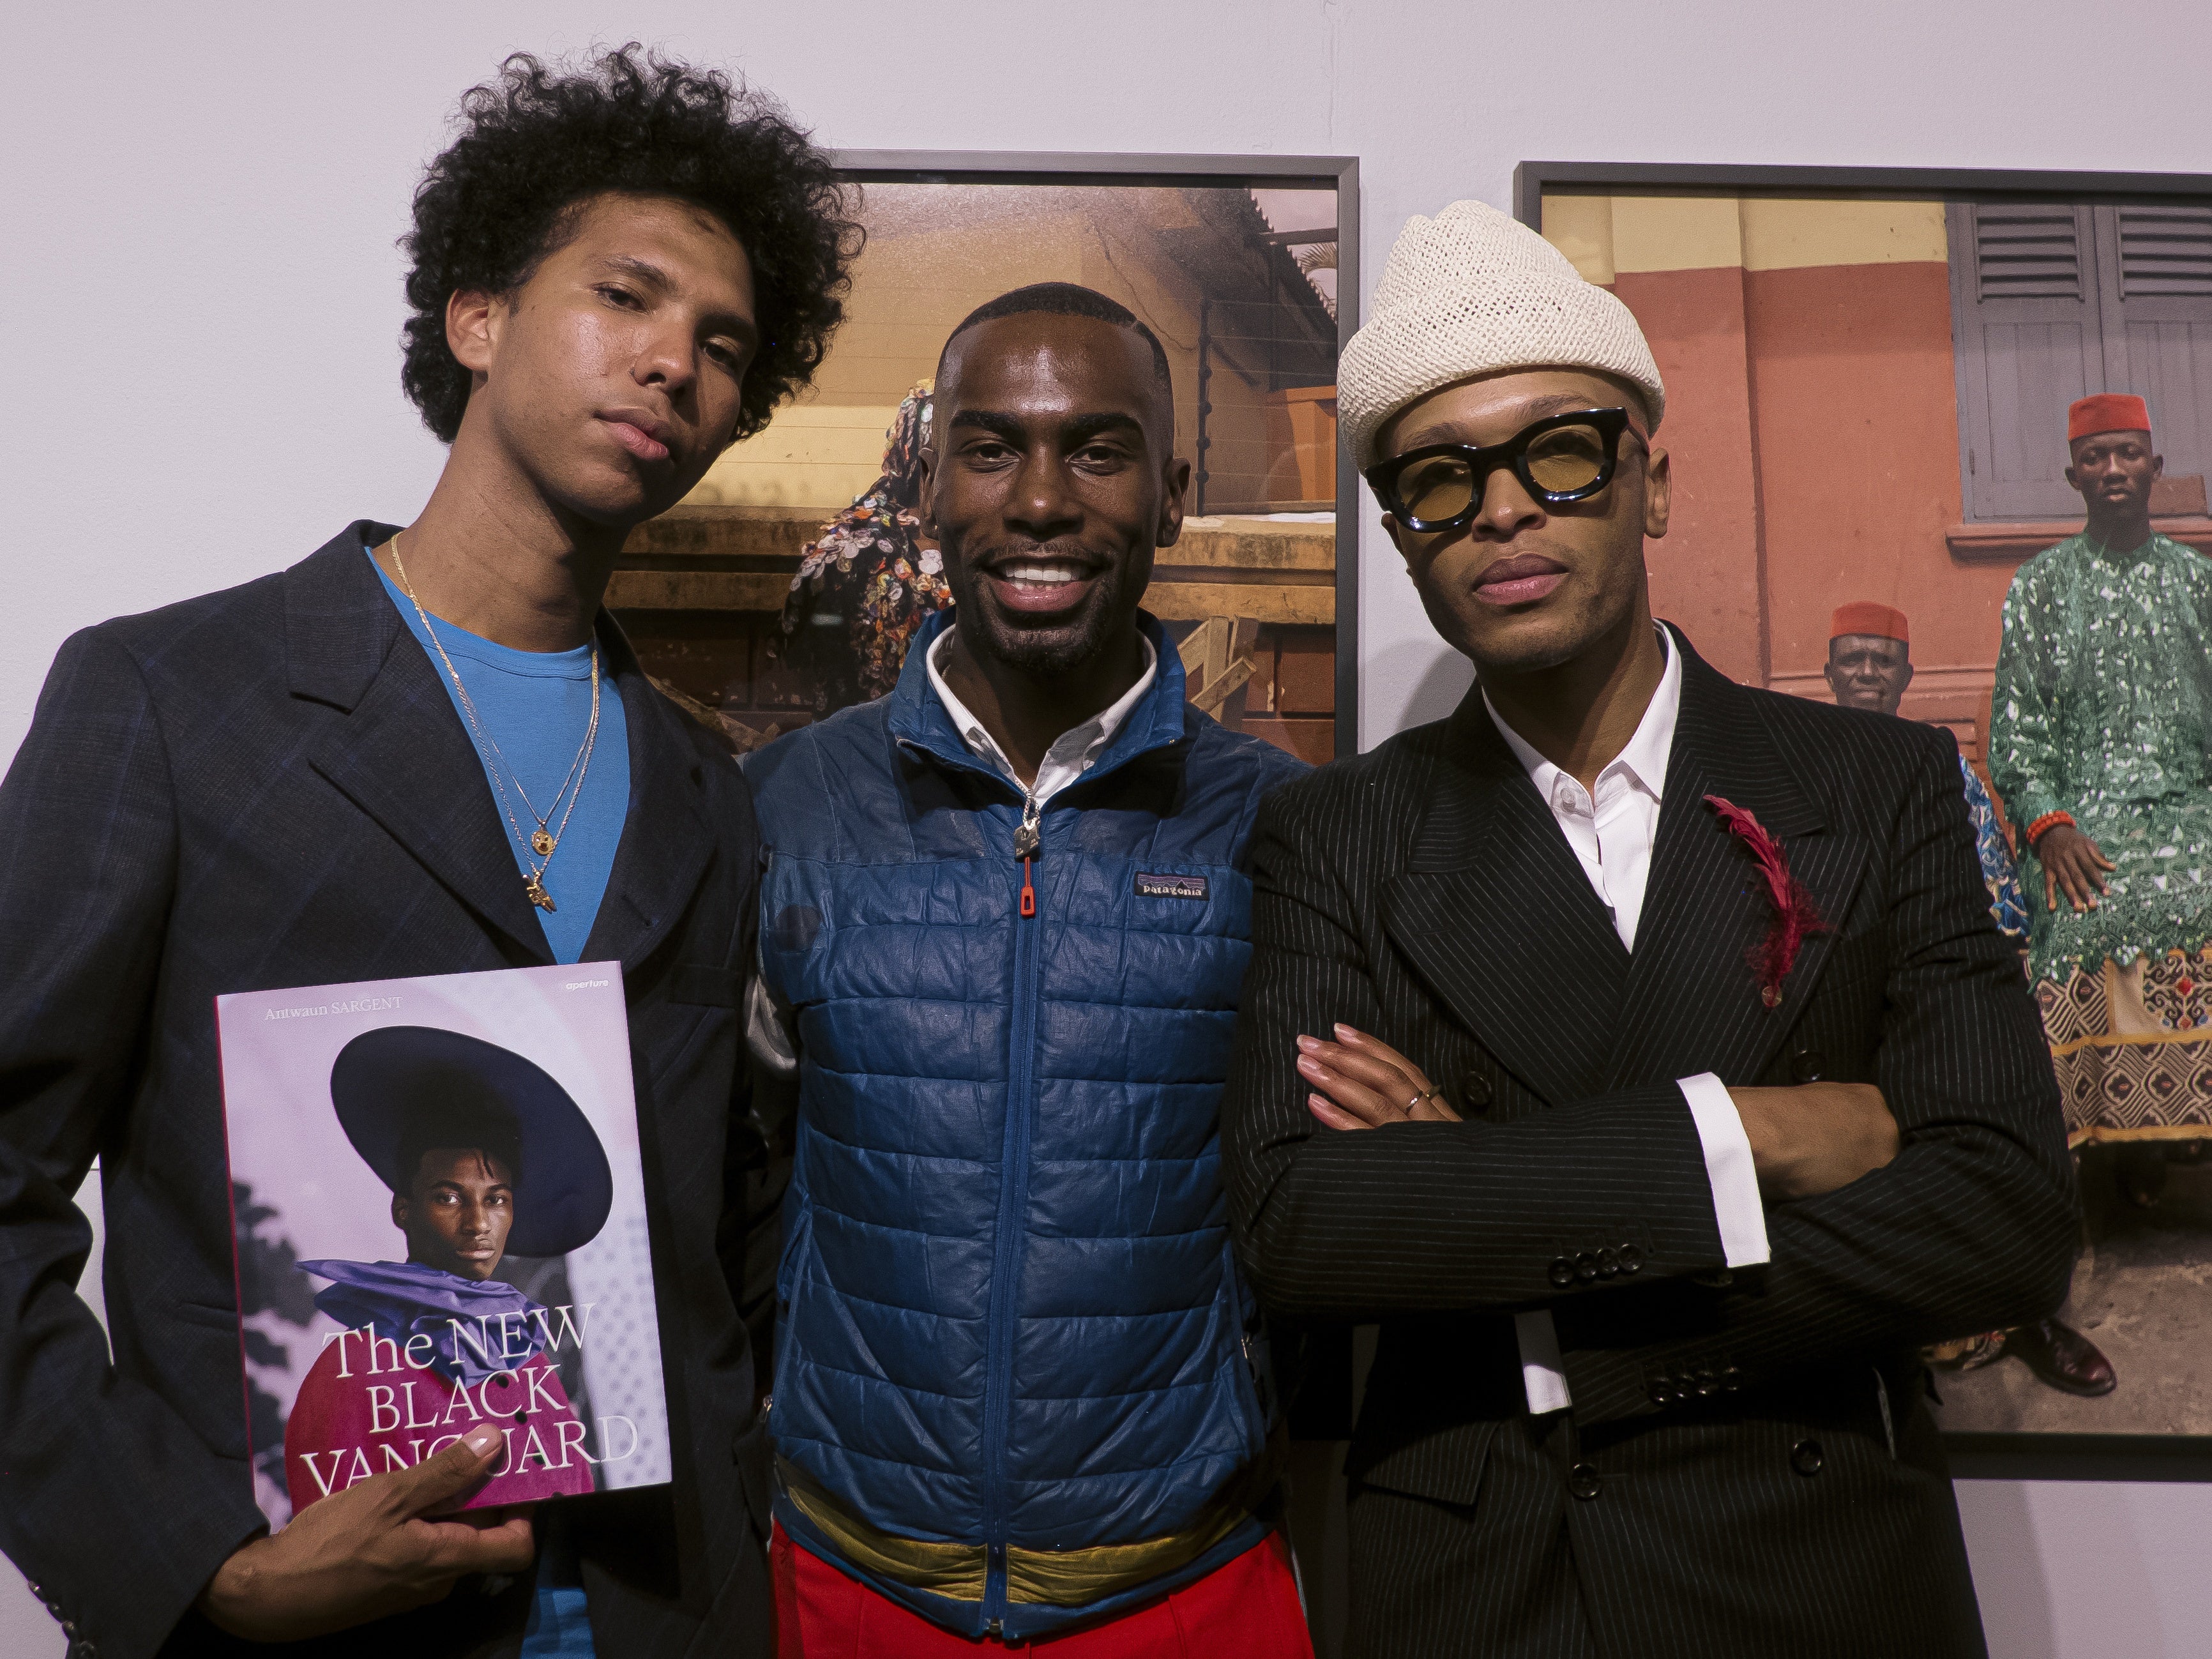 'The New Black Vanguard: Photography Between Art and Fashion' Is Introducing The Next Wave Of Black Creators